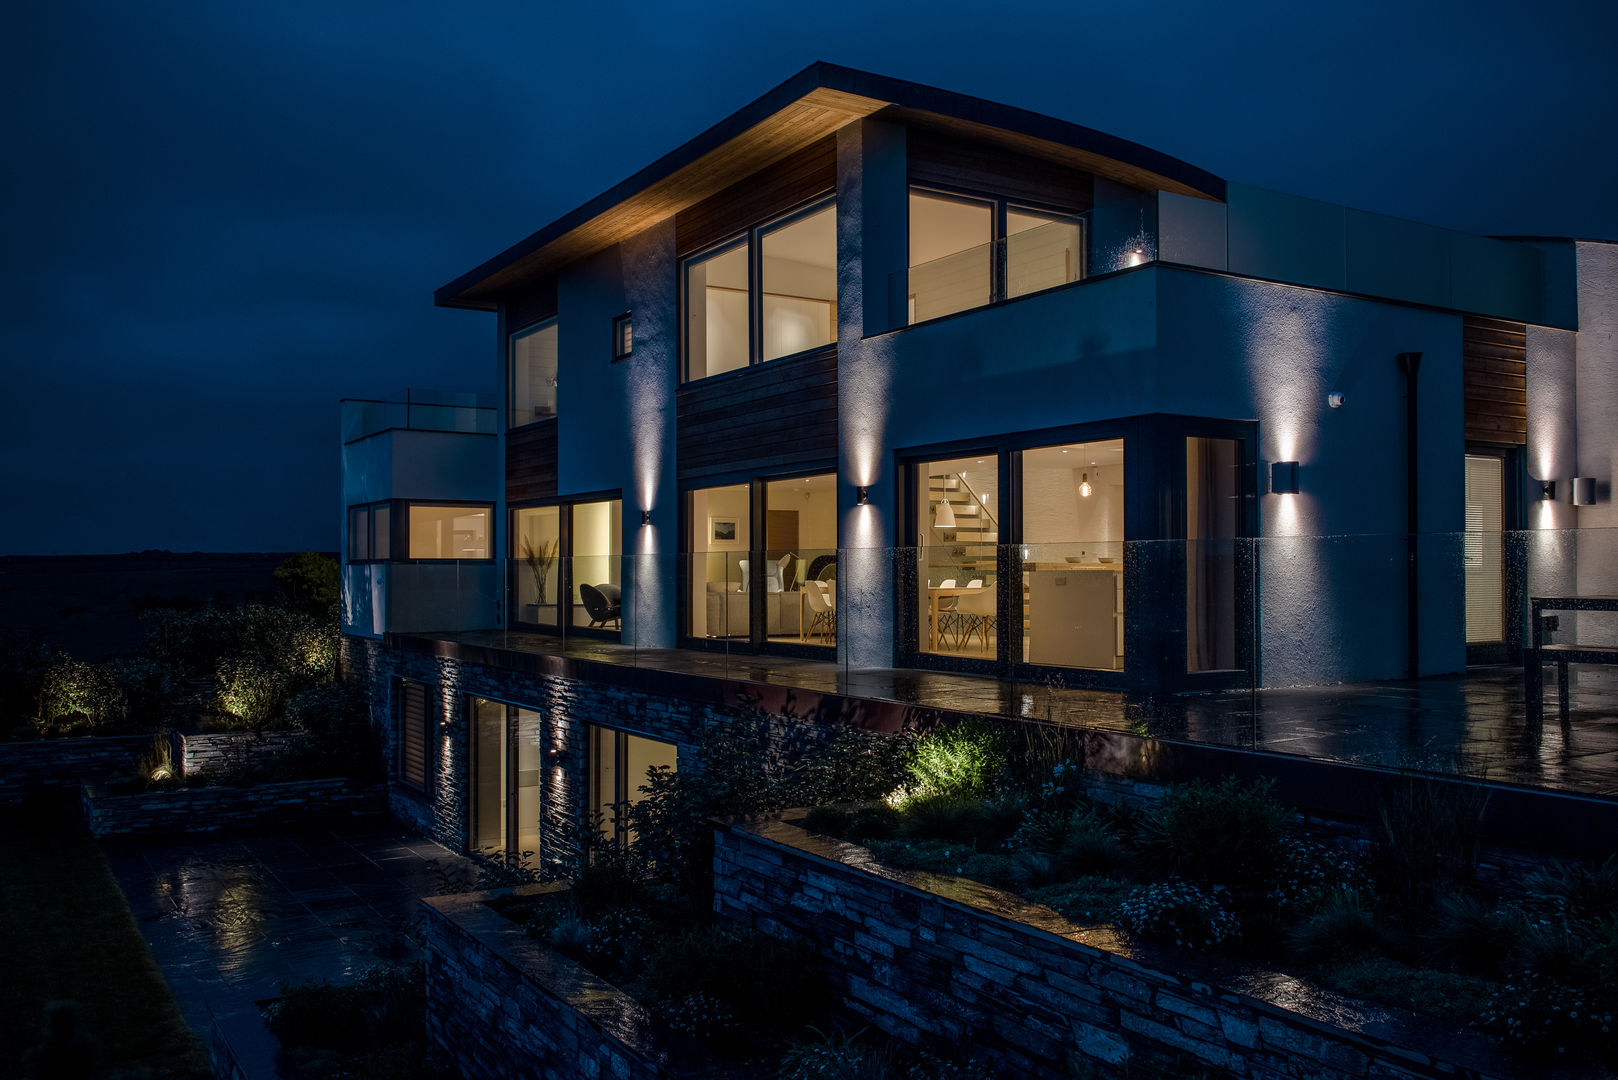 New Contemporary House, Polzeath, Cornwall Arco2 Architecture Ltd Modern houses Architects Cornwall, architecture Cornwall, arco2 architects, eco friendly architects, sustainable architects, sustainable architecture, architecture by the sea, beach house architecture,